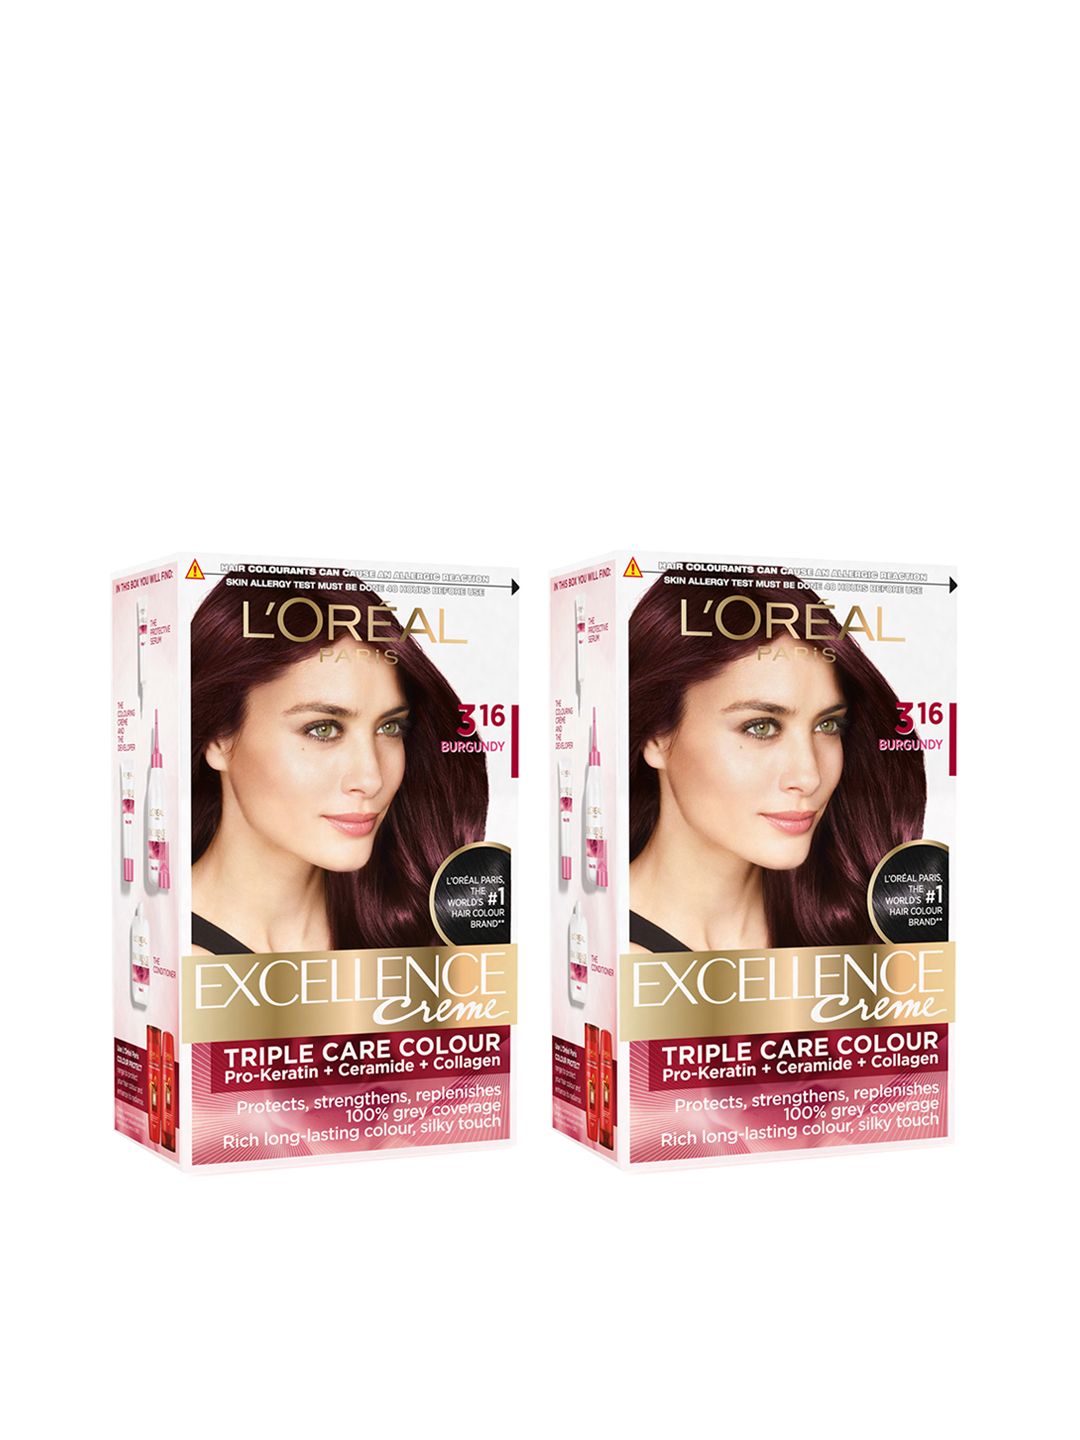 LOreal Paris Set of 2 Excellence Creme Hair Colour - Burgundy 3.16 Price in India